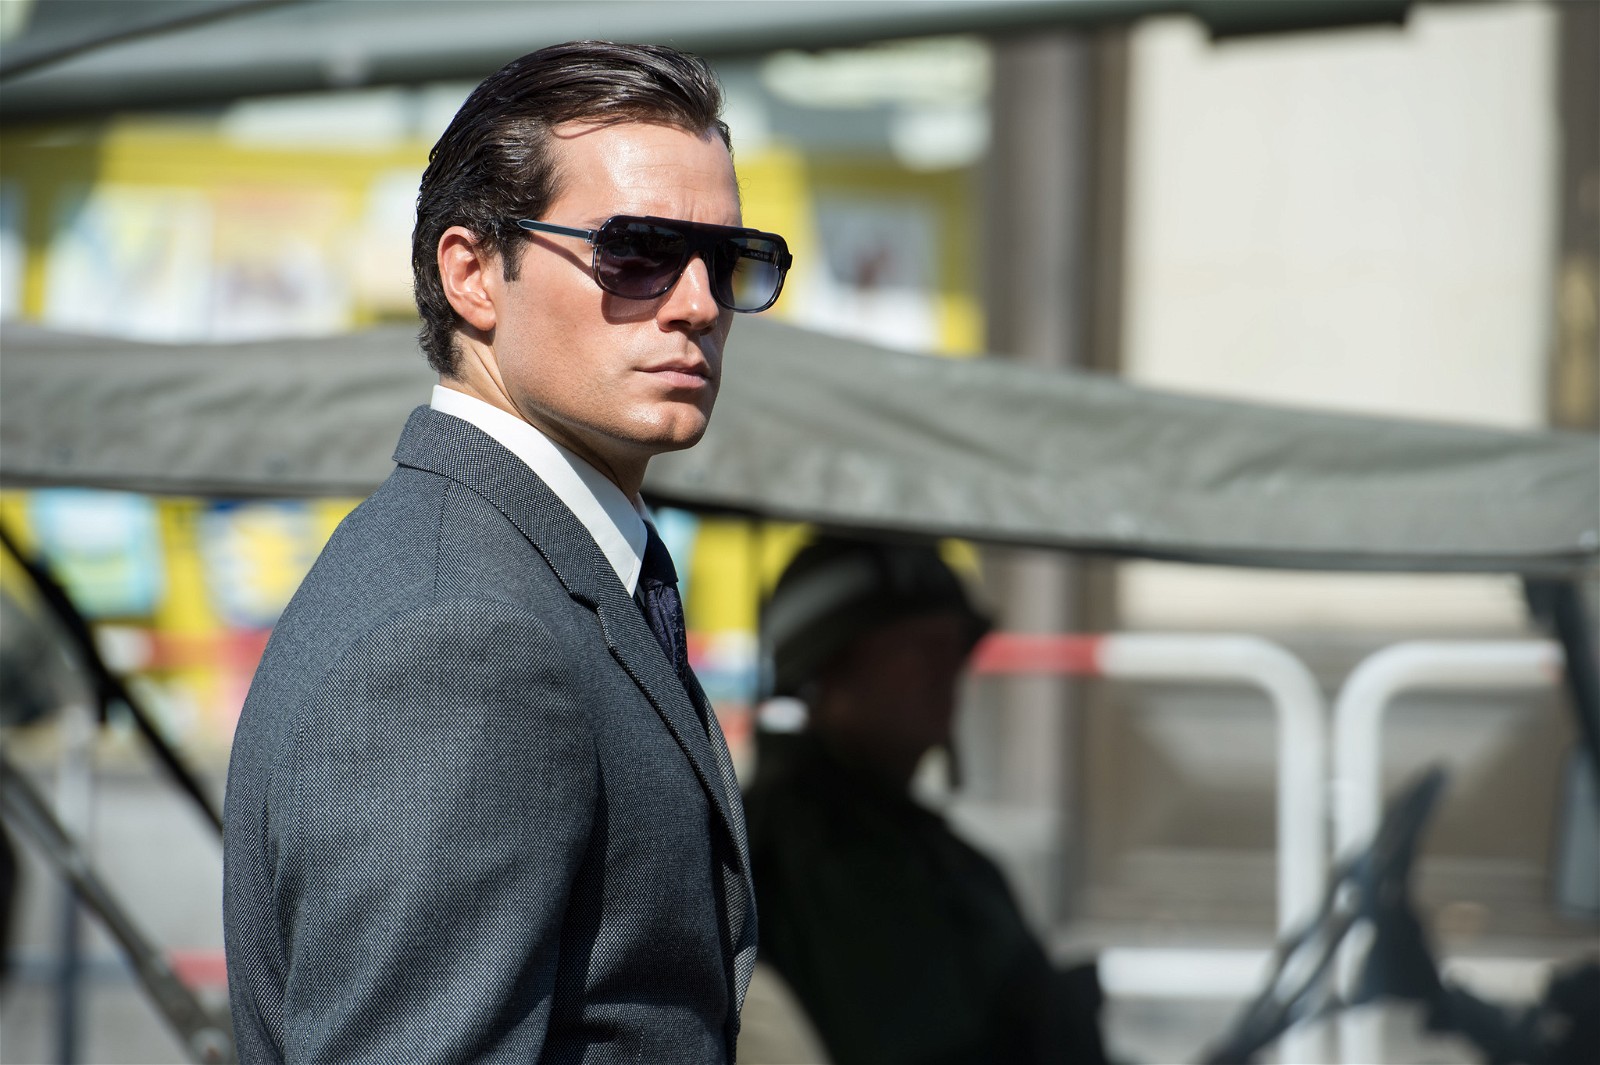 A still from The Man From U.N.C.L.E.